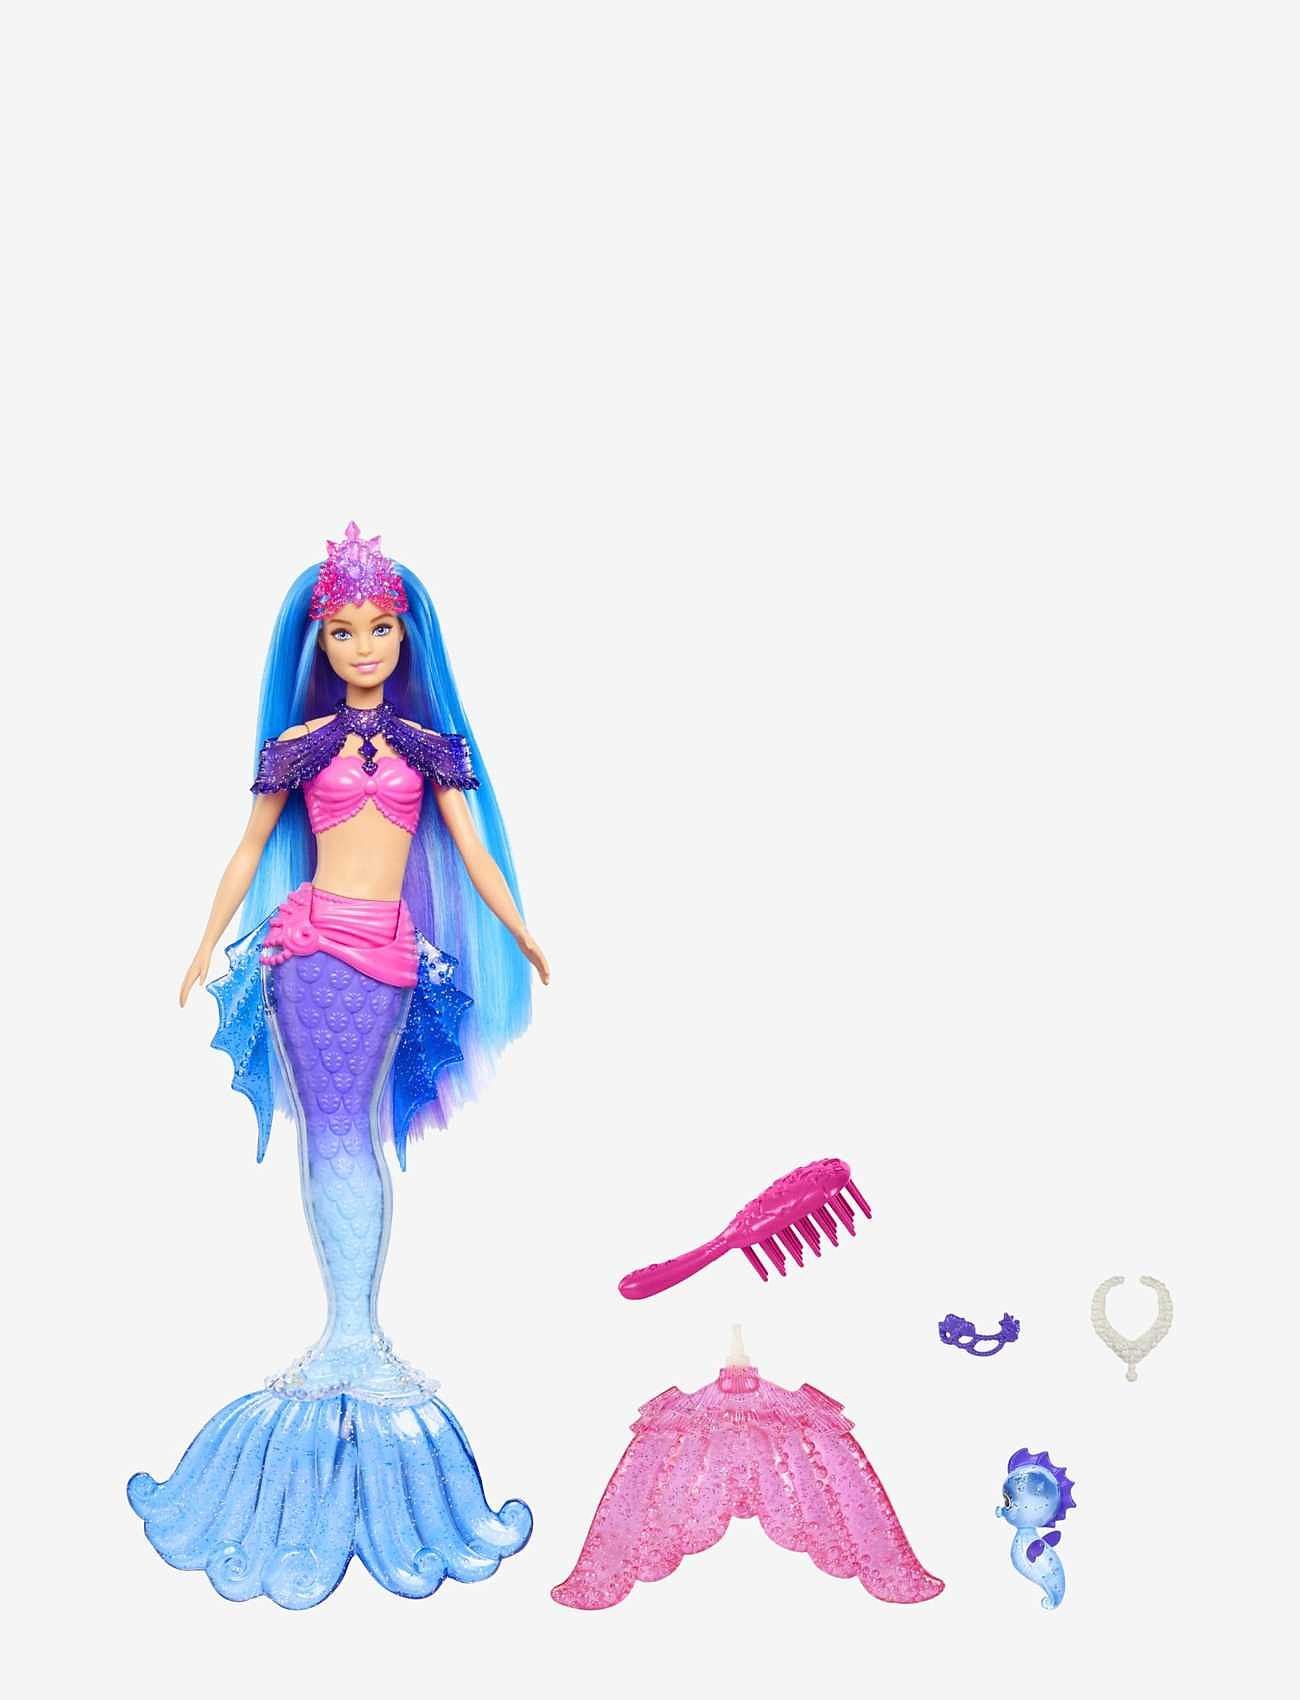 Barbie - Mermaid Power Doll and Accessories - nuket - multi color - 1